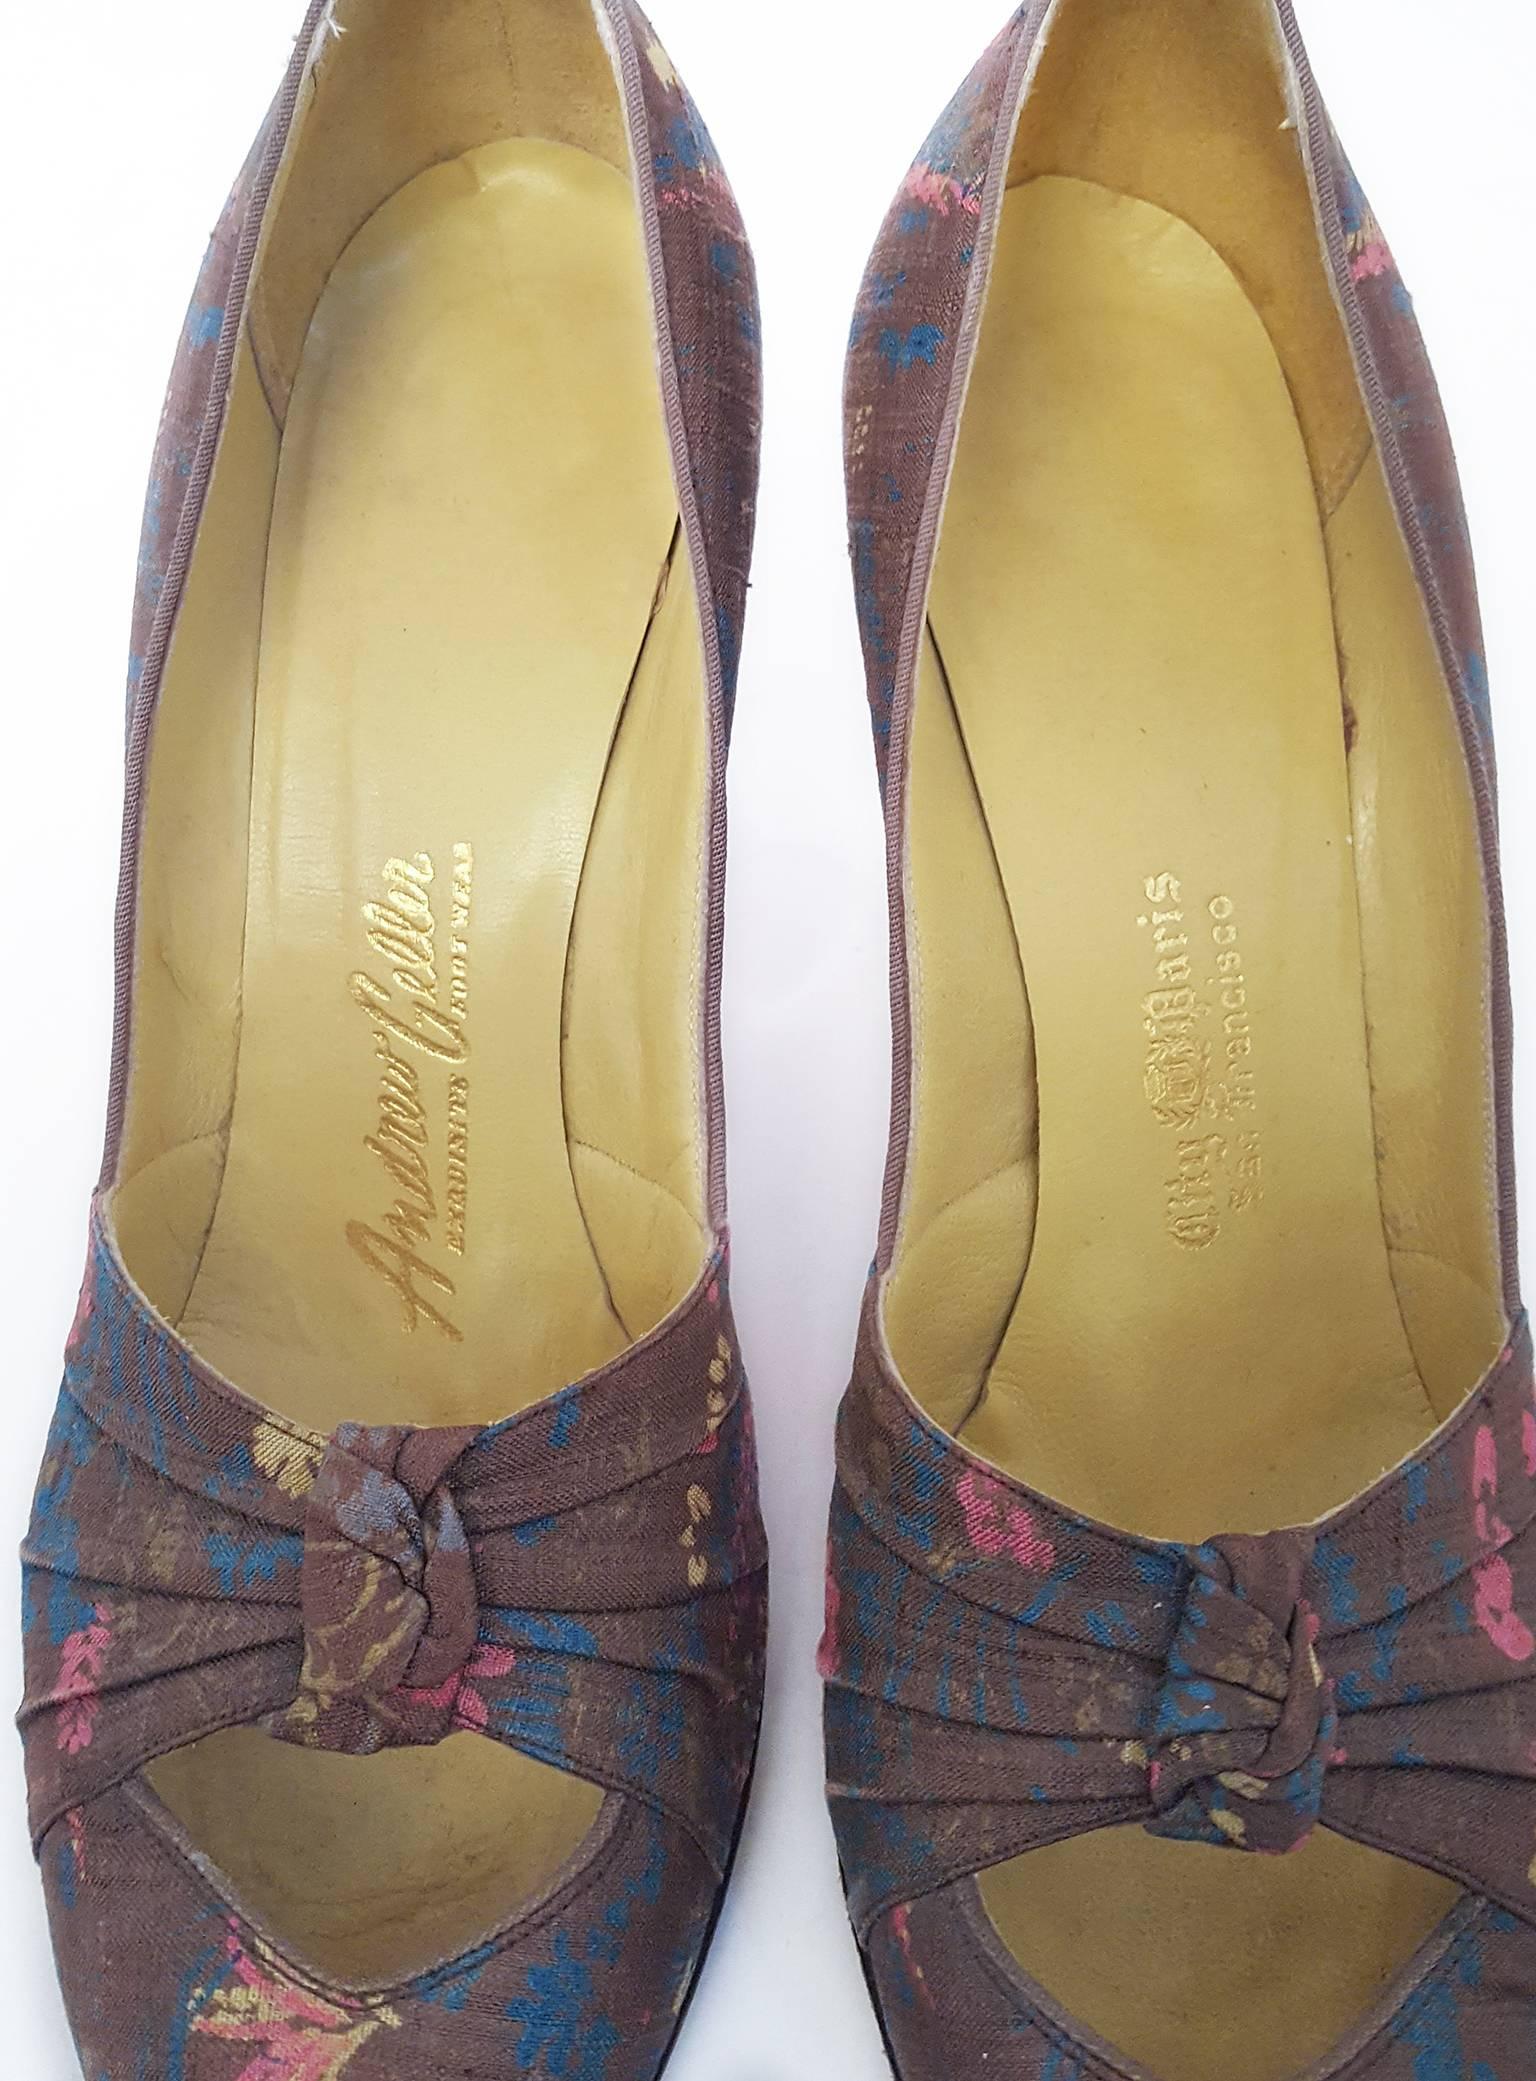 50s Satin Print Heel In Excellent Condition For Sale In San Francisco, CA